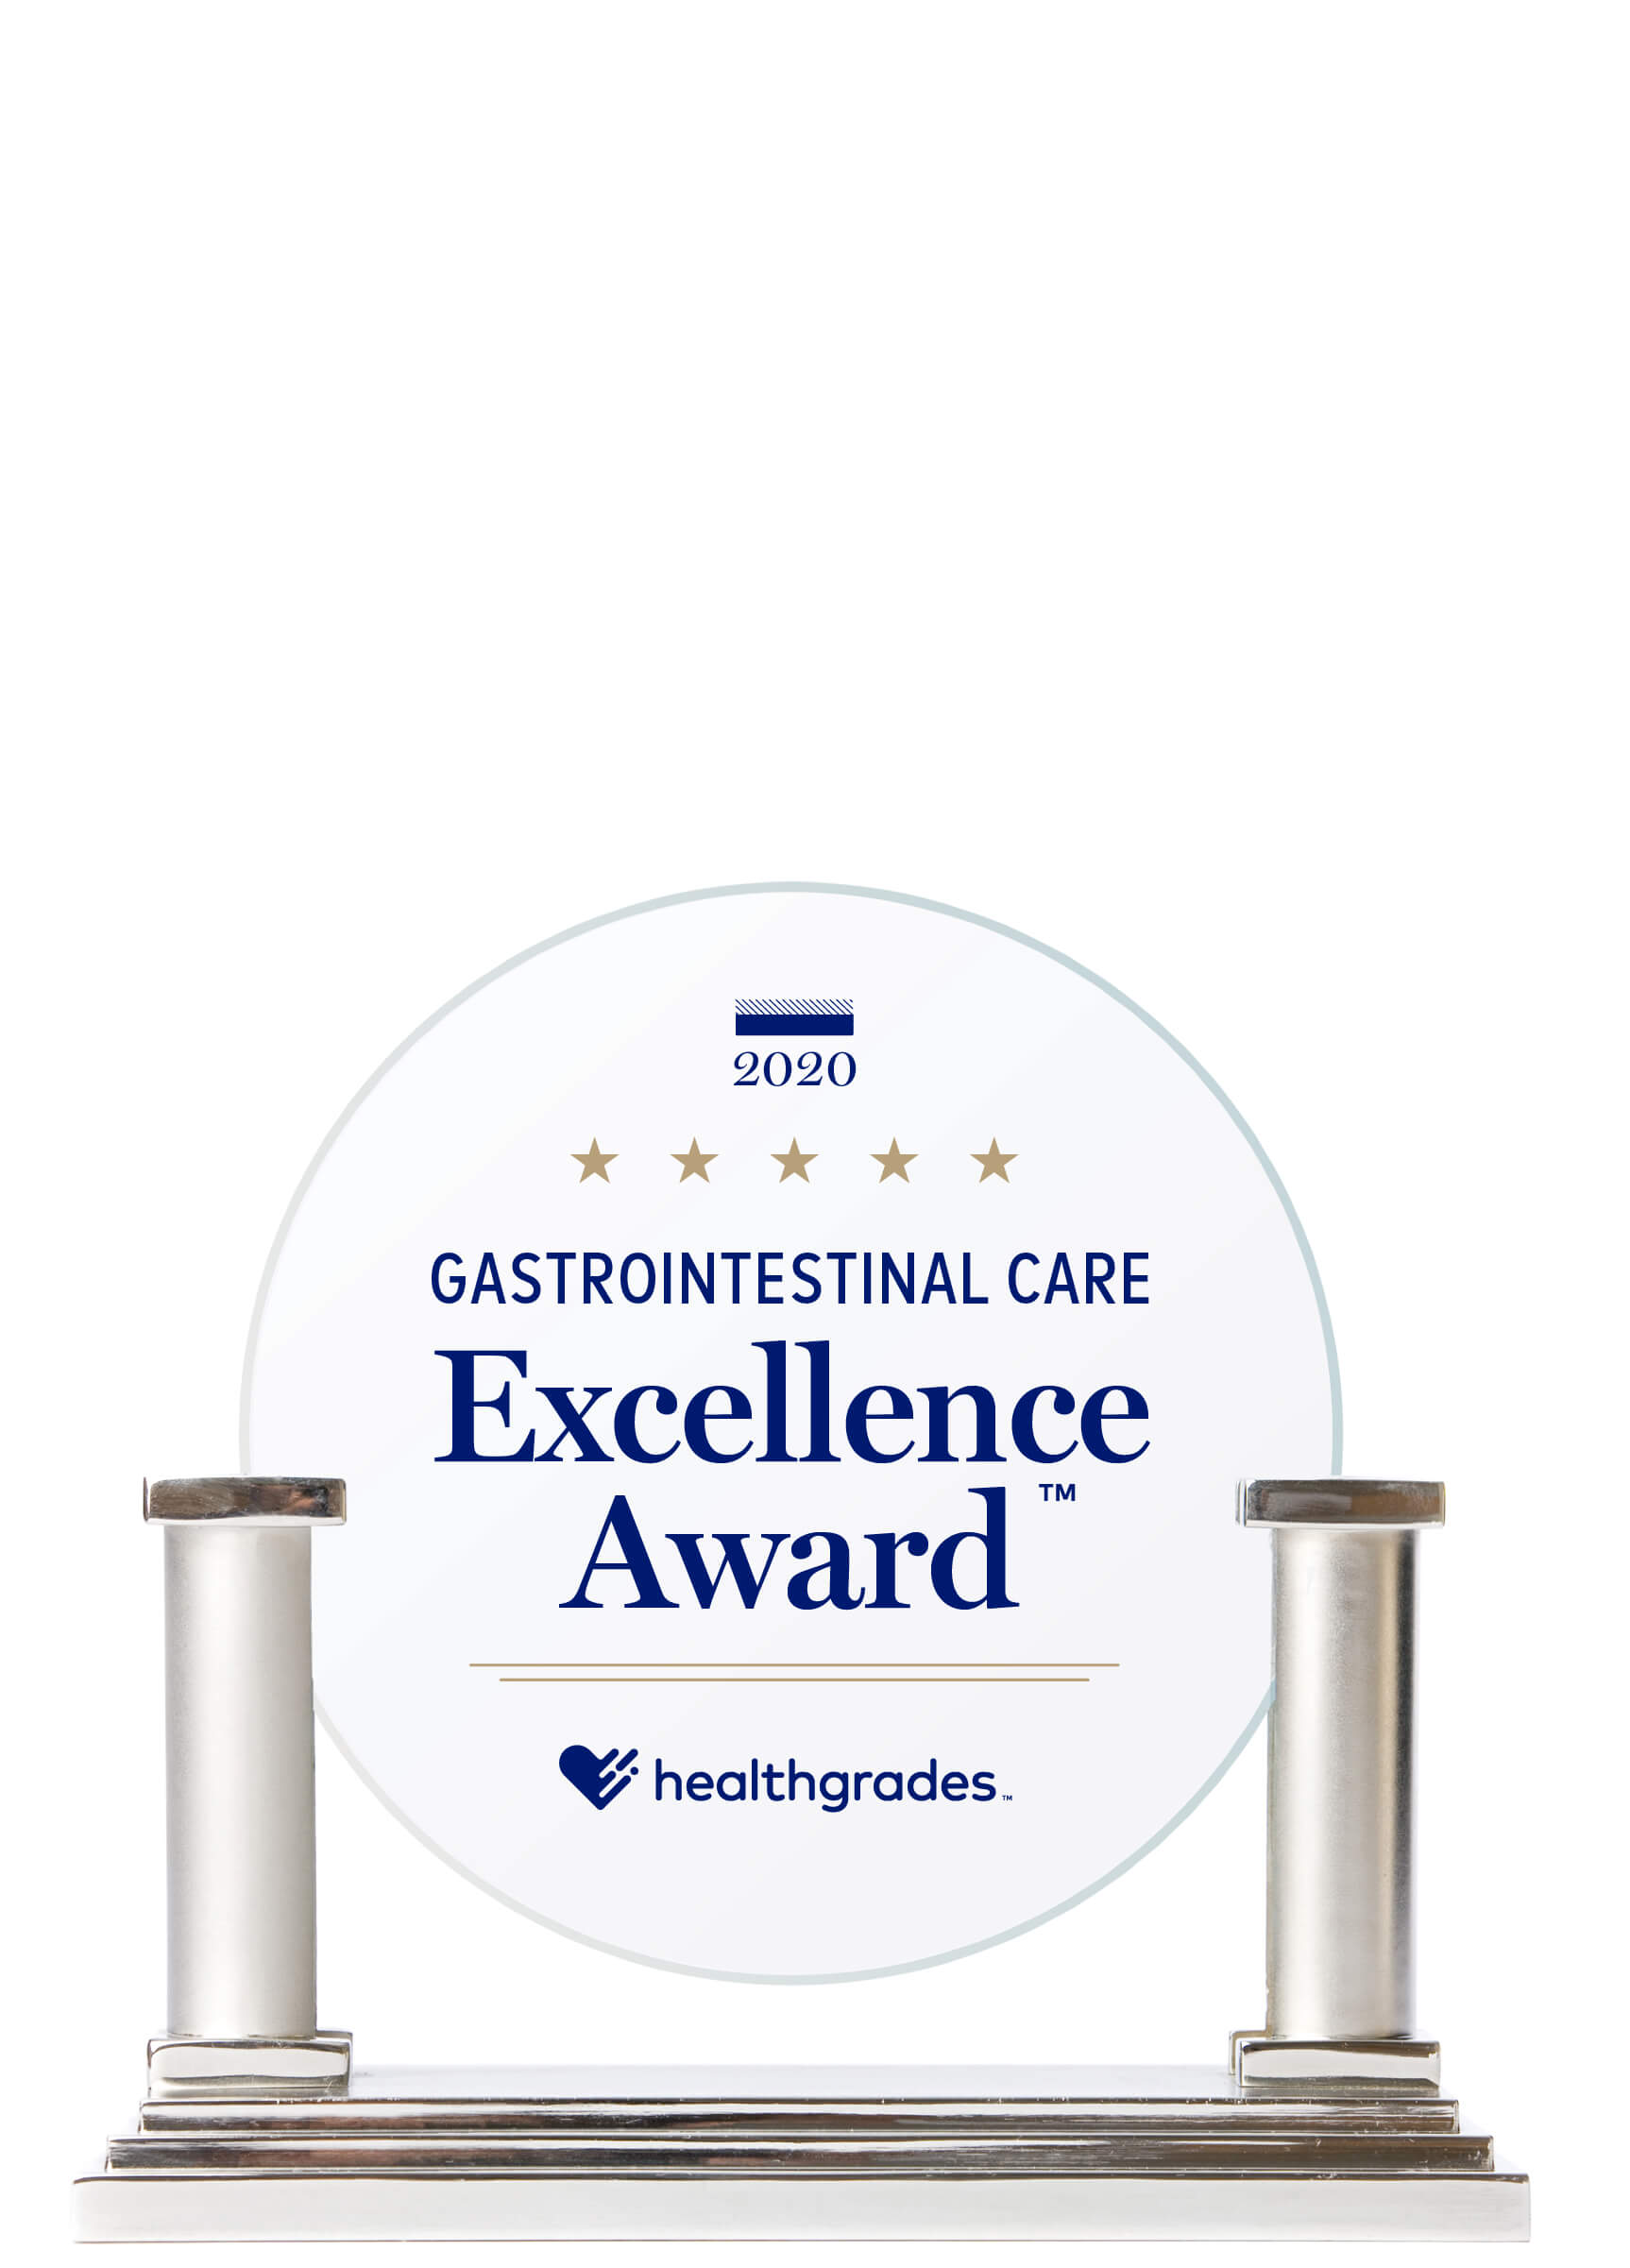 Healthgrades Excellence Award for Gastrointestinal Care Trophy 2020